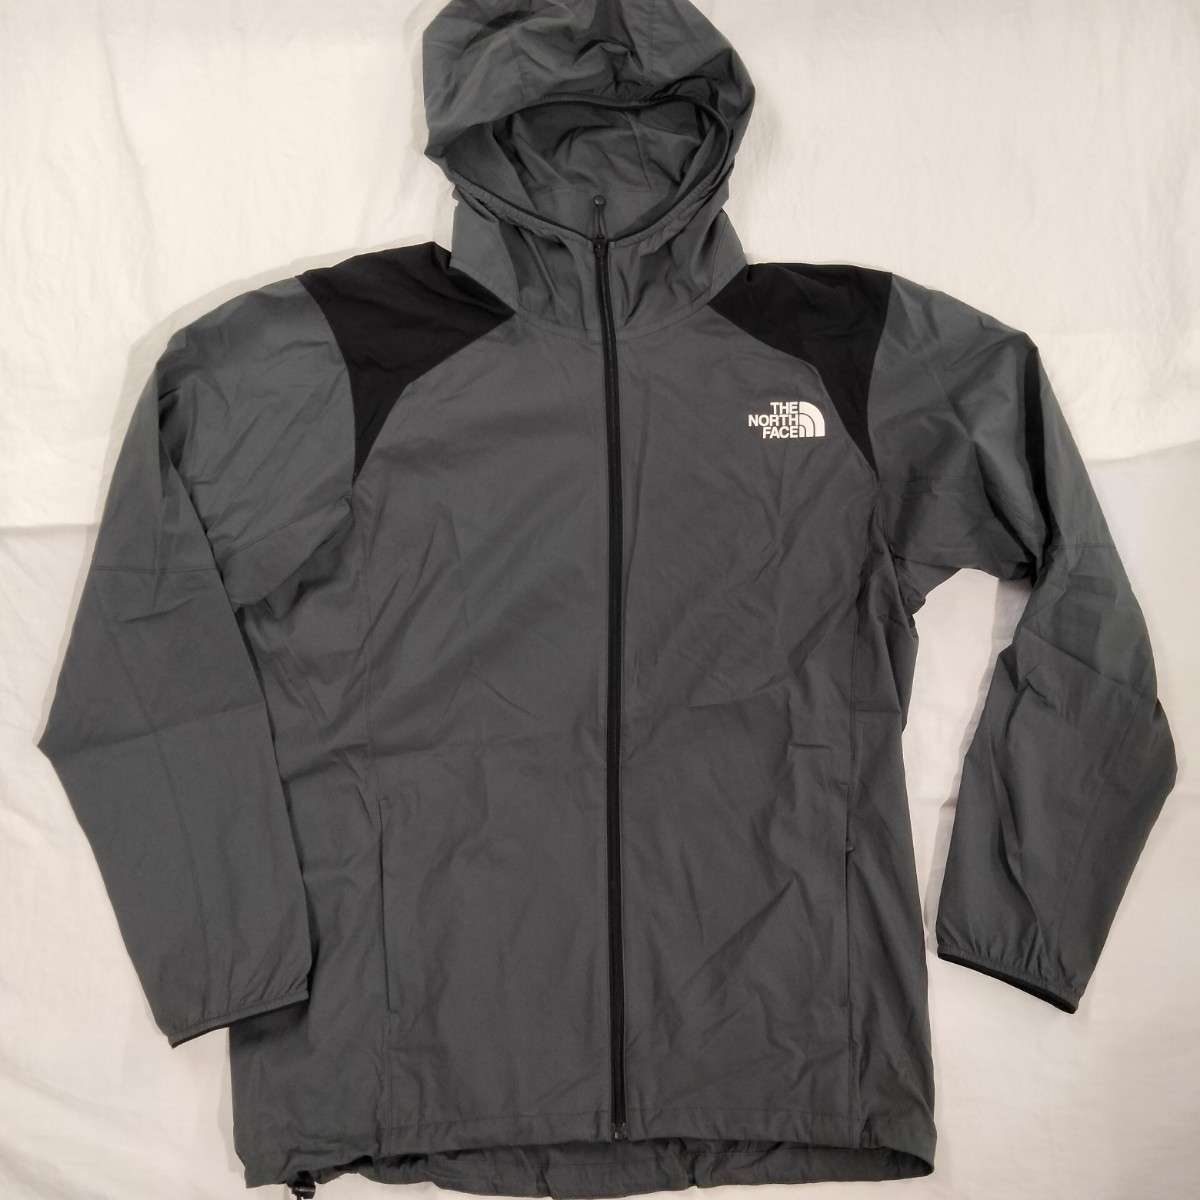 THE NORTH FACE 　ザ・ノースフェイス 　エニータイム　ウィンドフーディ Anytime Wind Hoodie ストレッチ　ナイロン　パーカー parka Ｍ